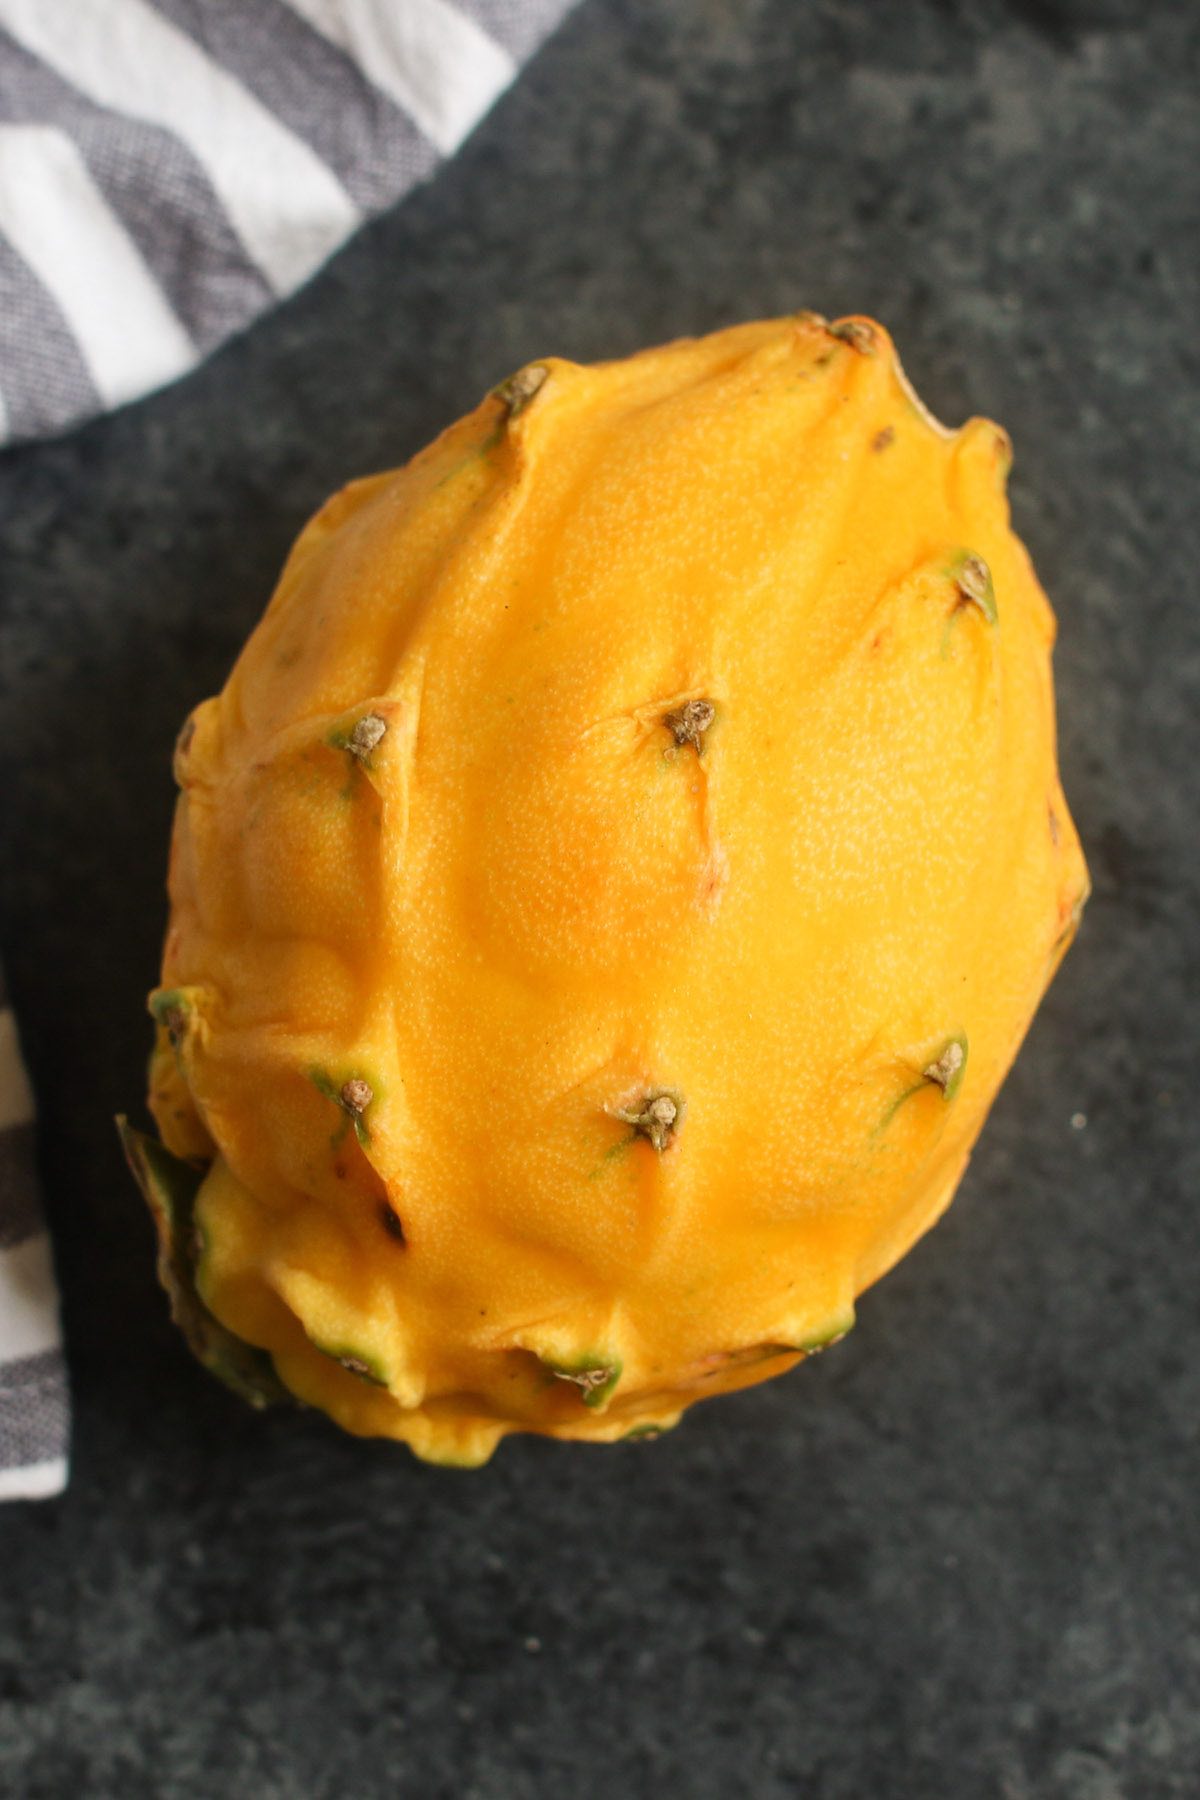 A whole yellow pitaya with its bright yellow color, oblong shape and knobby skin